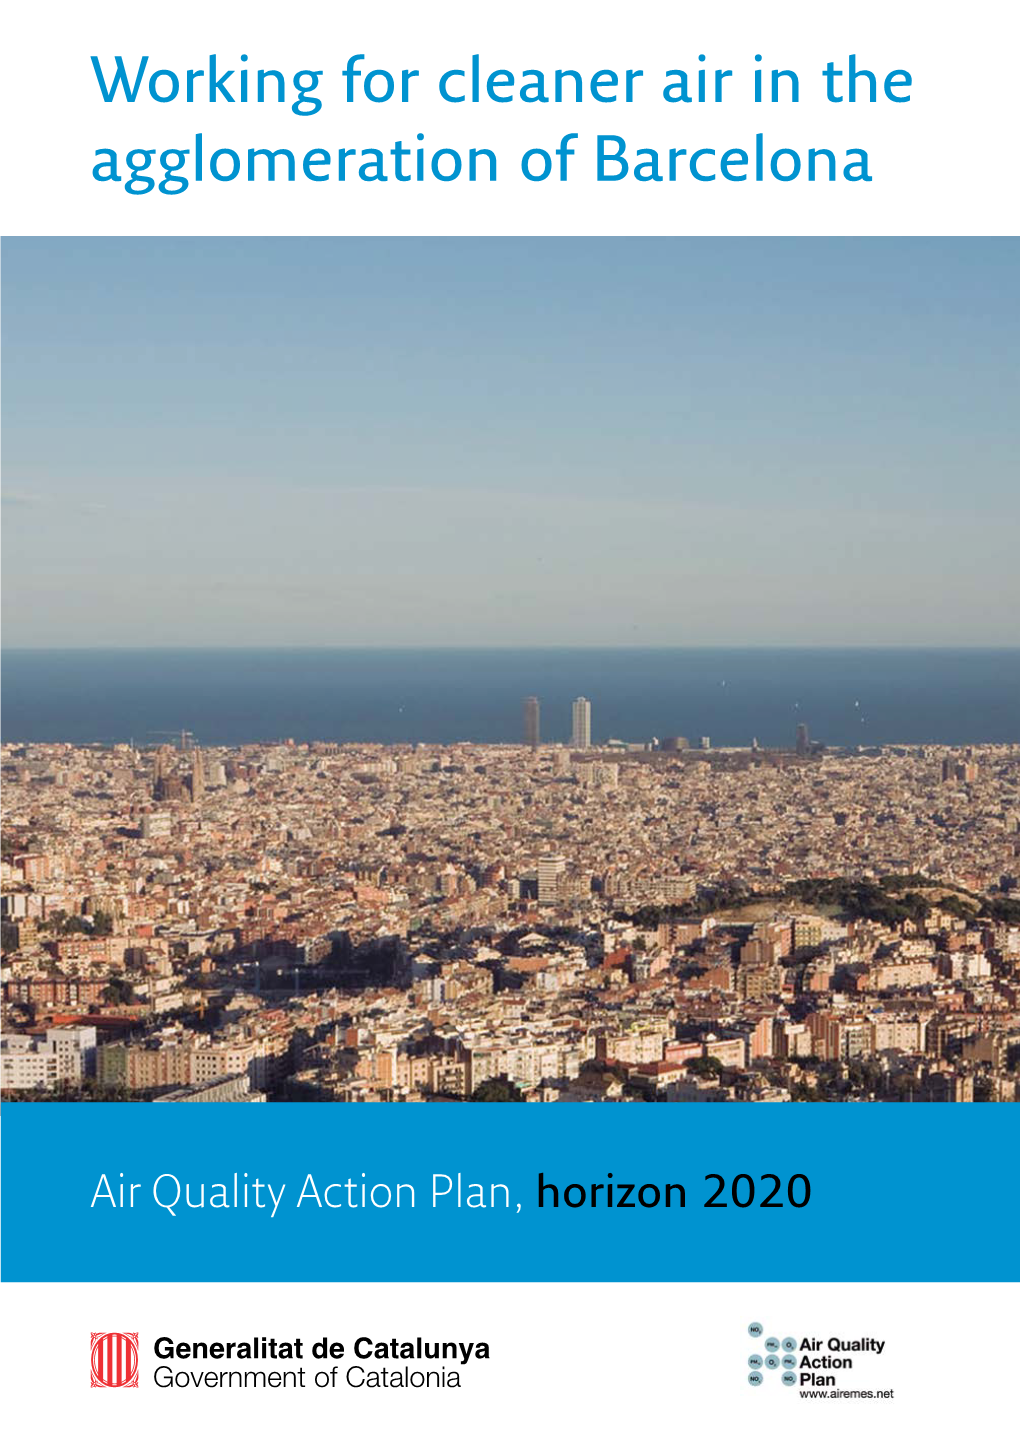 Working for Cleaner Air in the Agglomeration of Barcelona